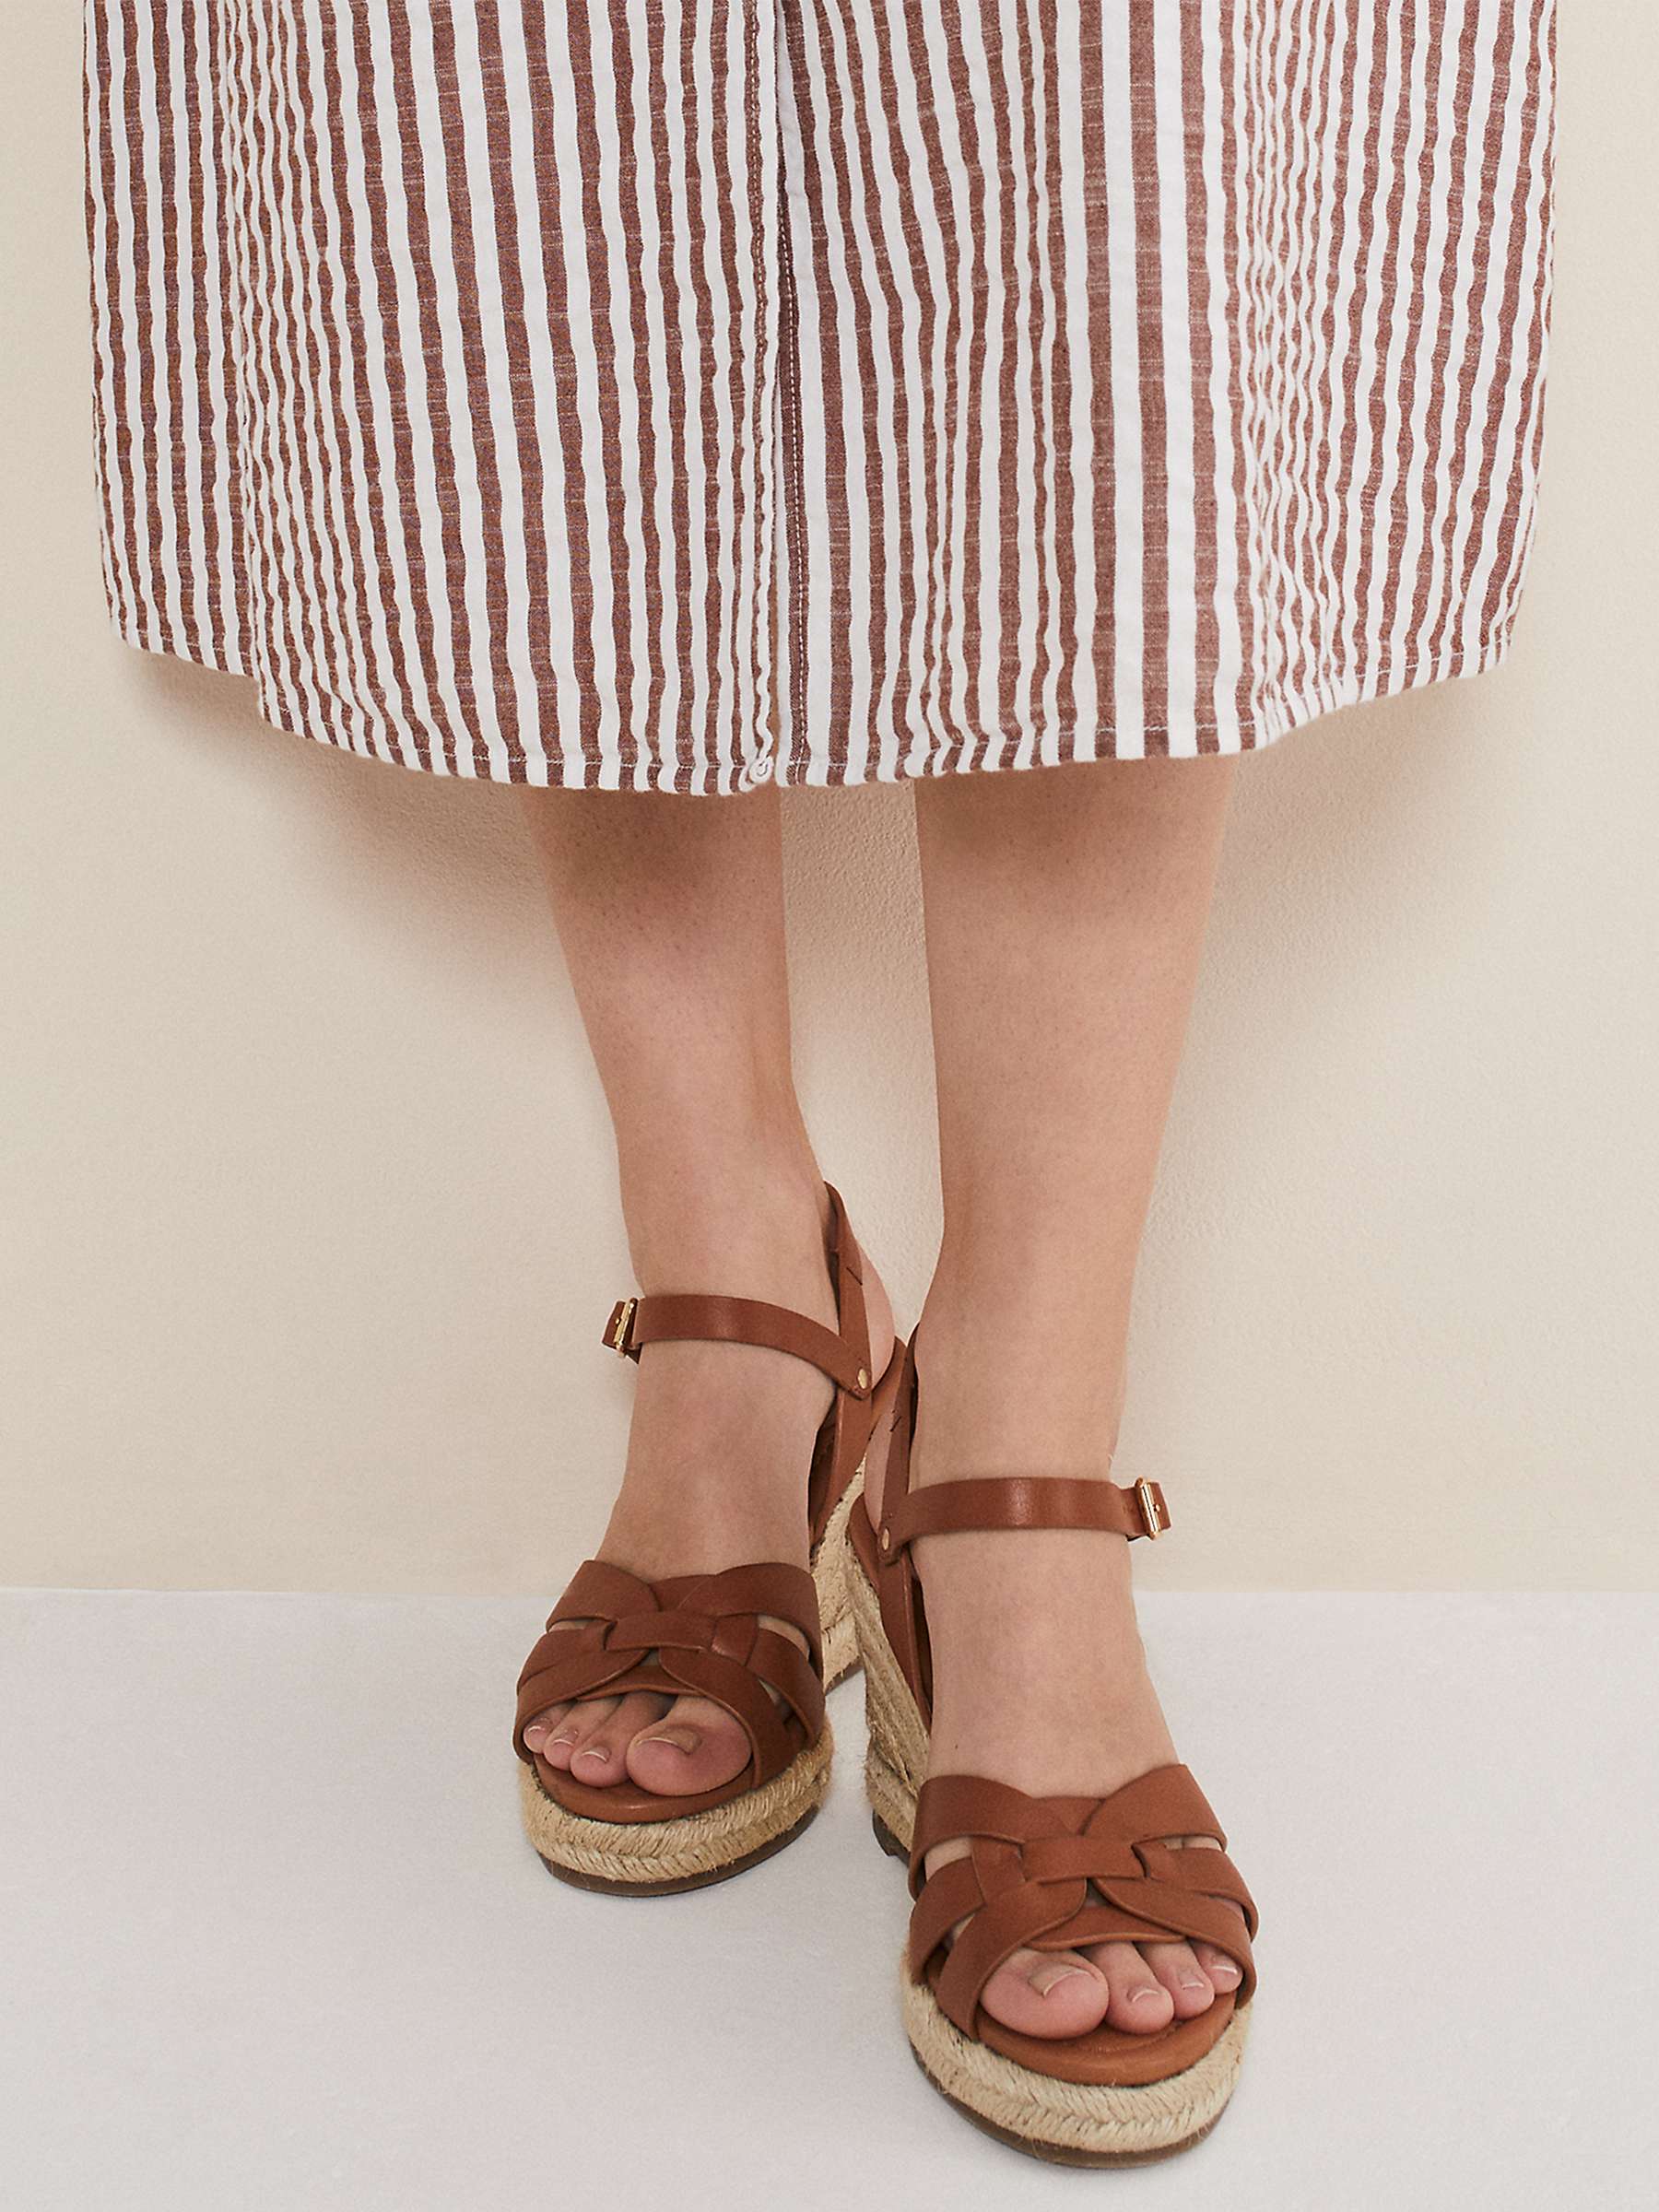 Buy Phase Eight Leather Multi Strap Espadrille Wedge Sandals, Tan Online at johnlewis.com